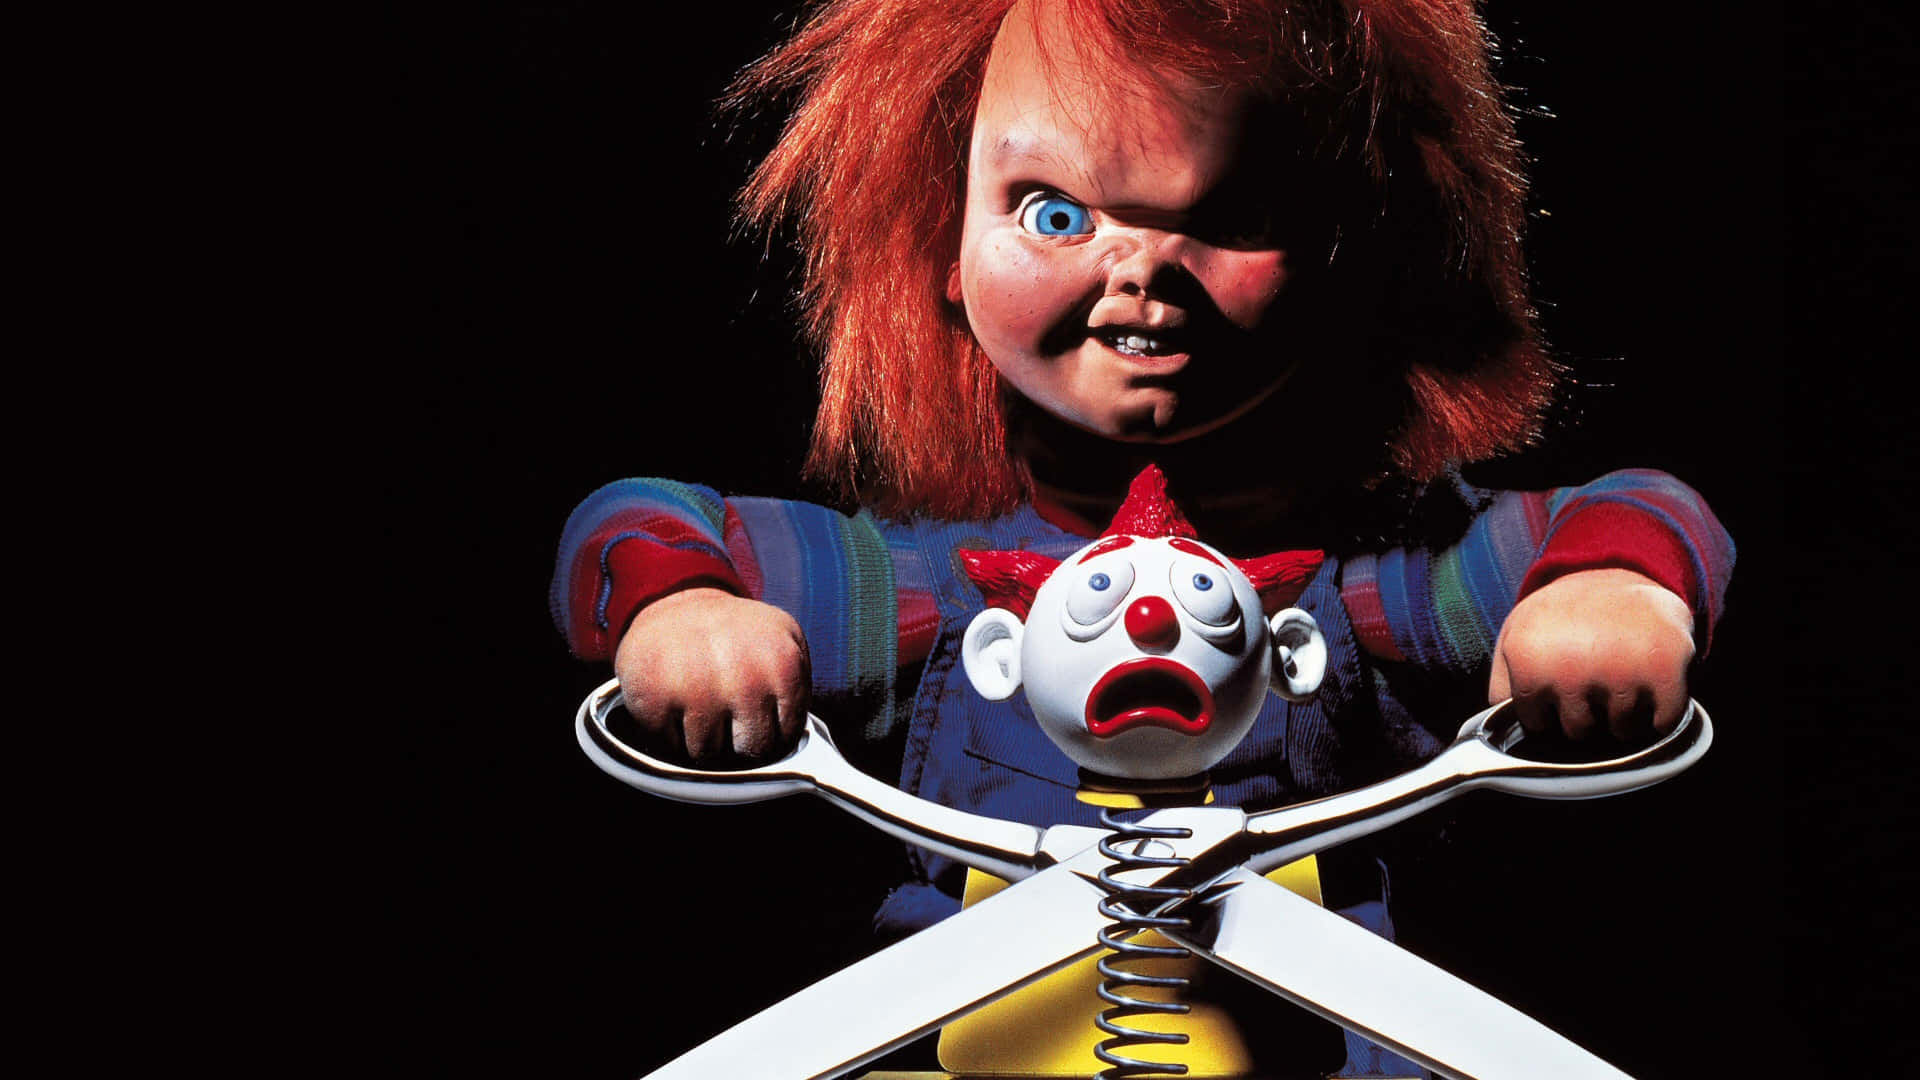 Join Chucky On His Horror-Filled Adventure!